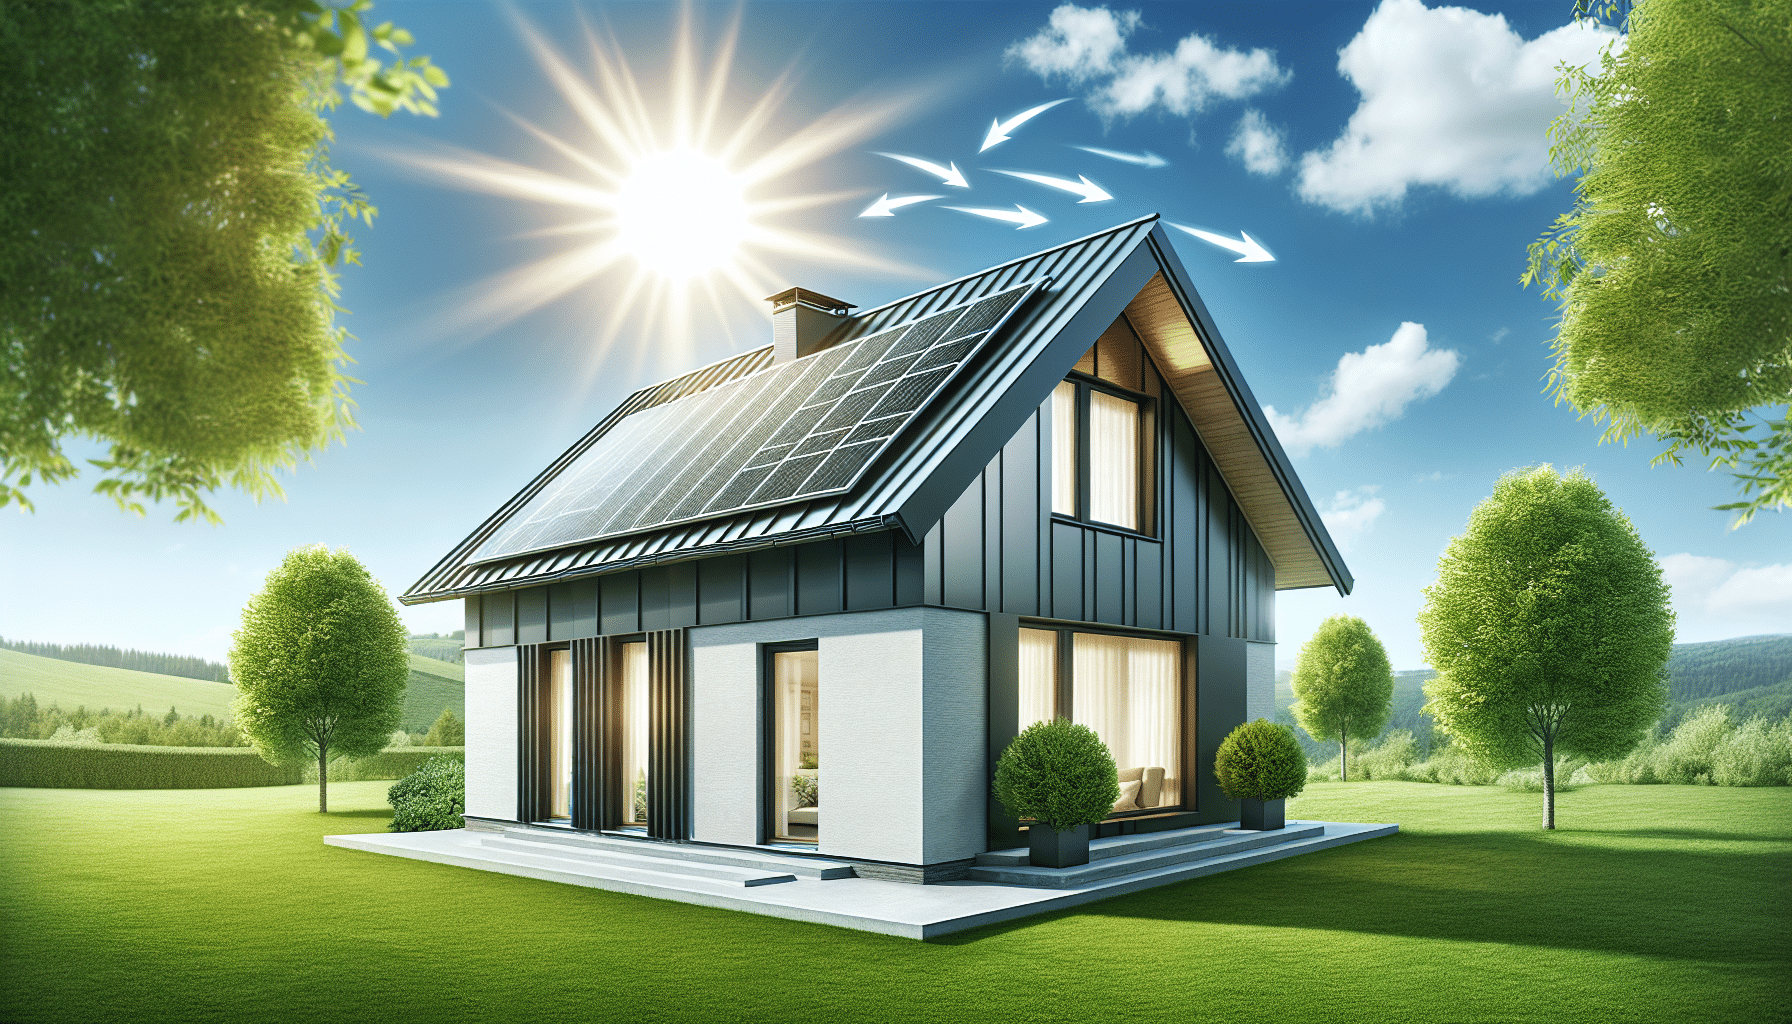 Synergy between roofing and siding for energy efficiency